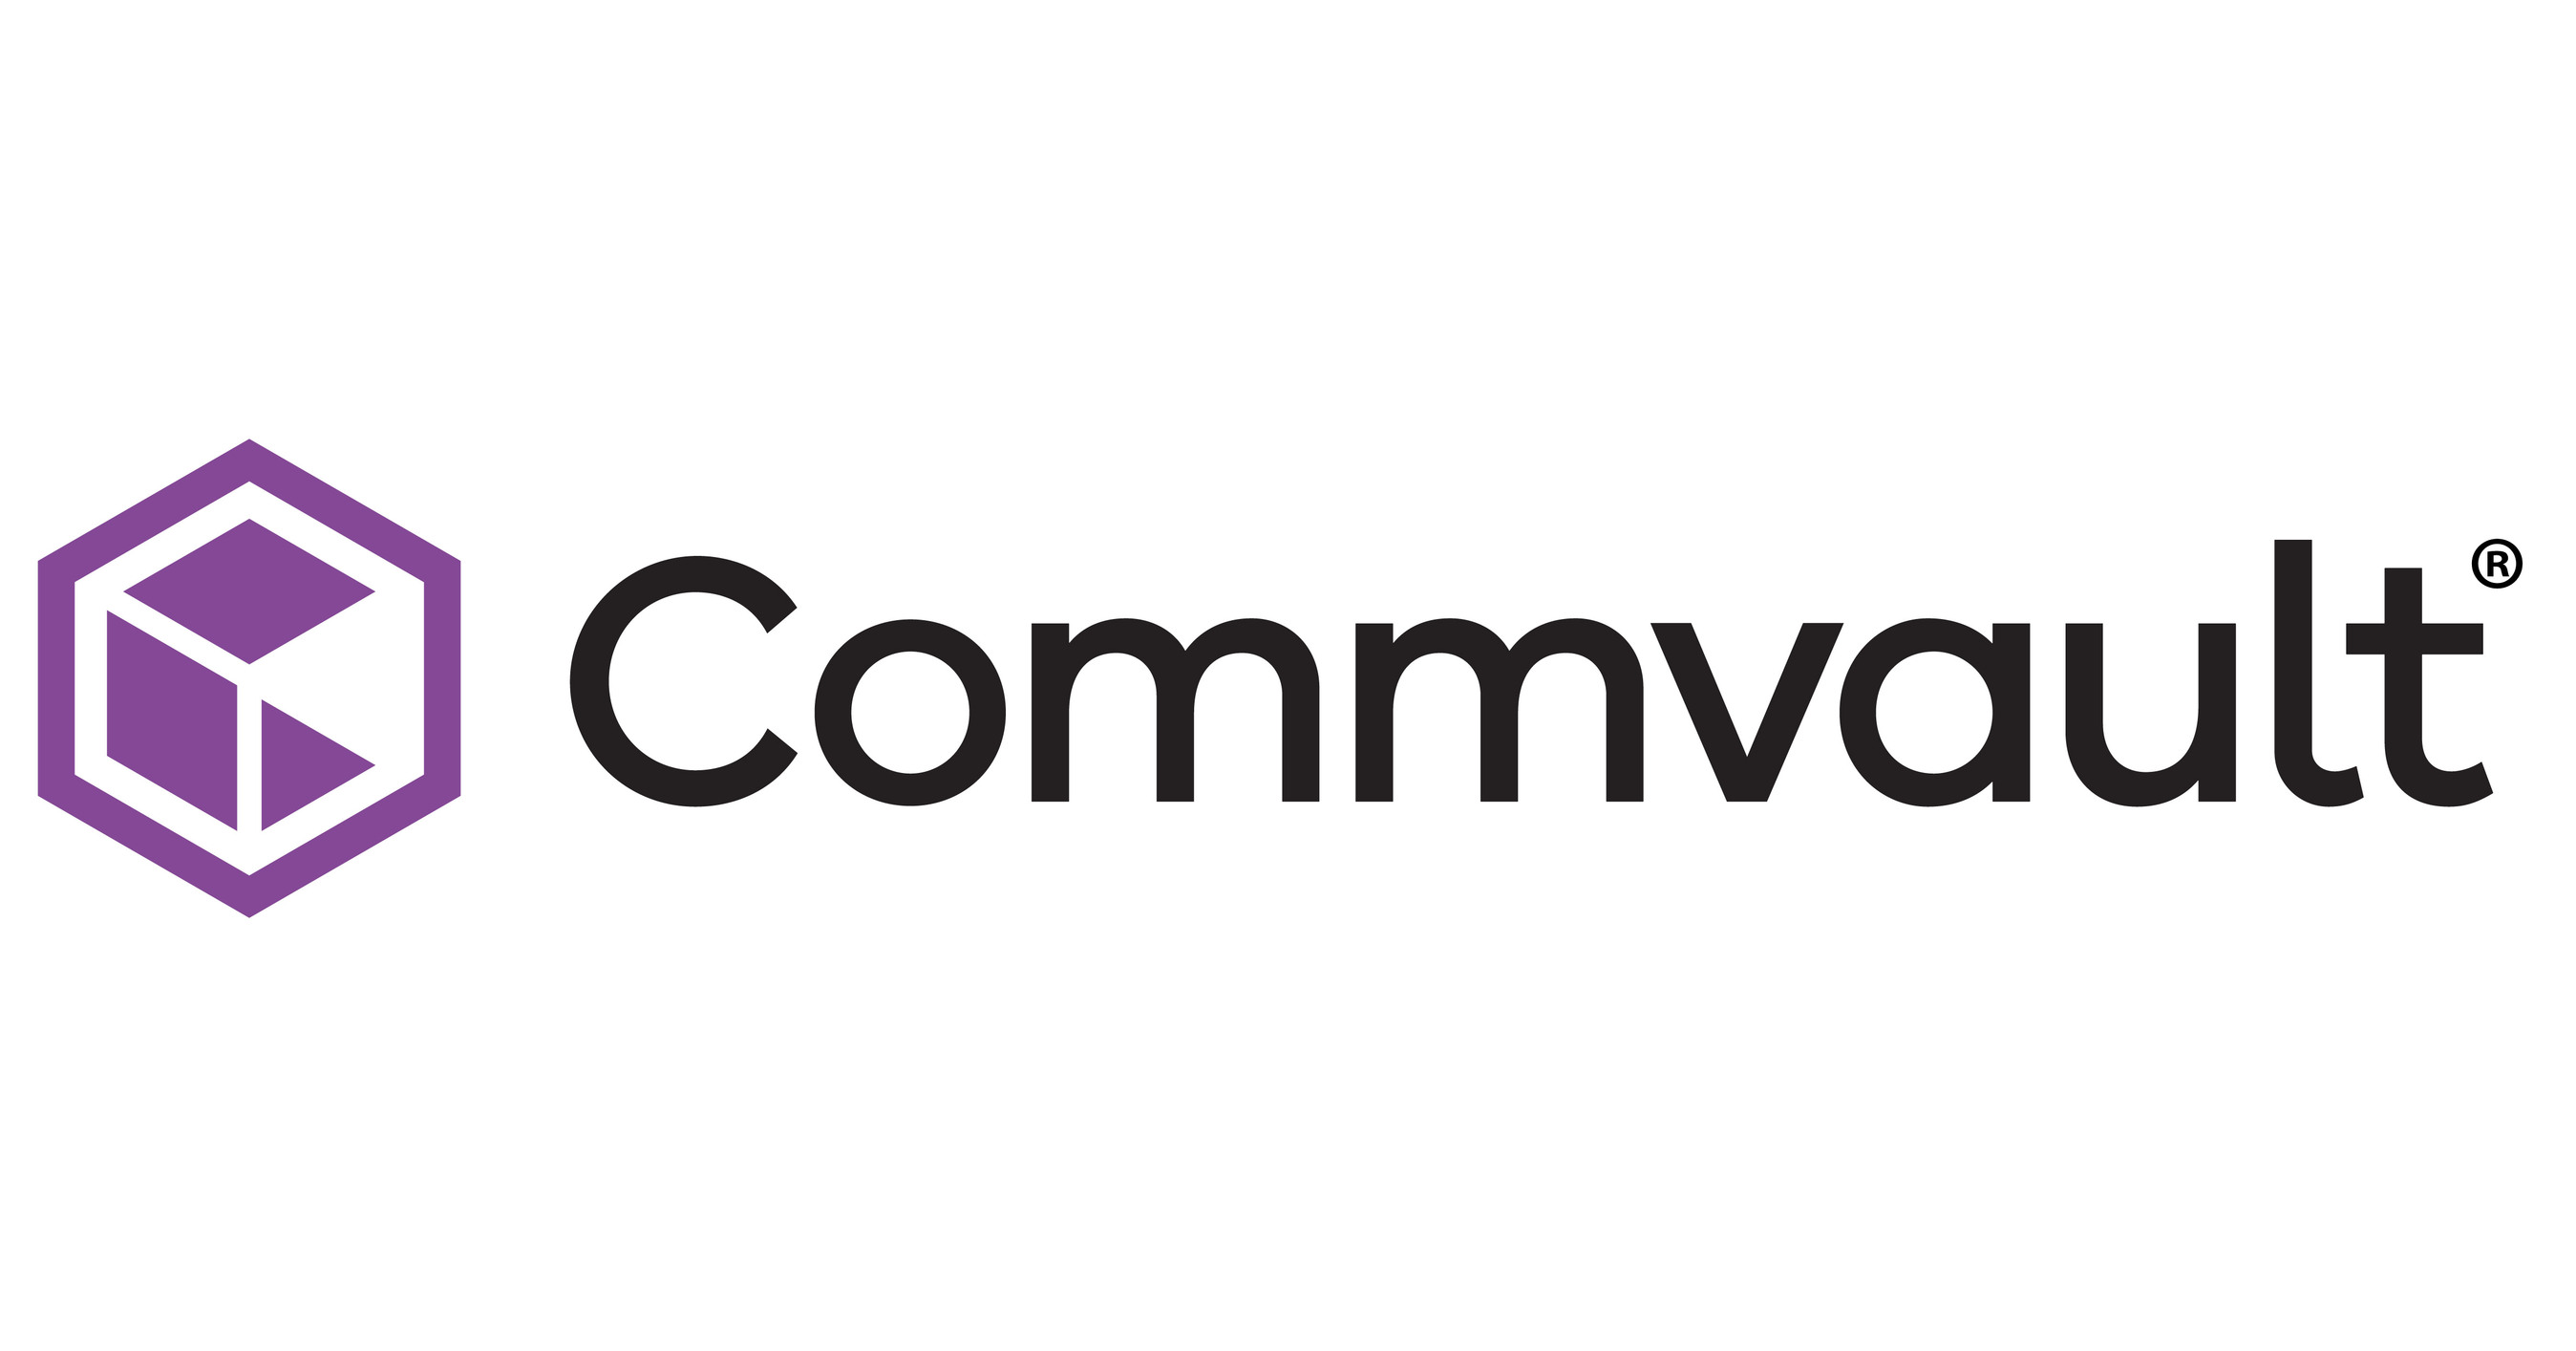 Commvault Announces ScaleProtect ™ with Cisco UCS for Scale-Out Data